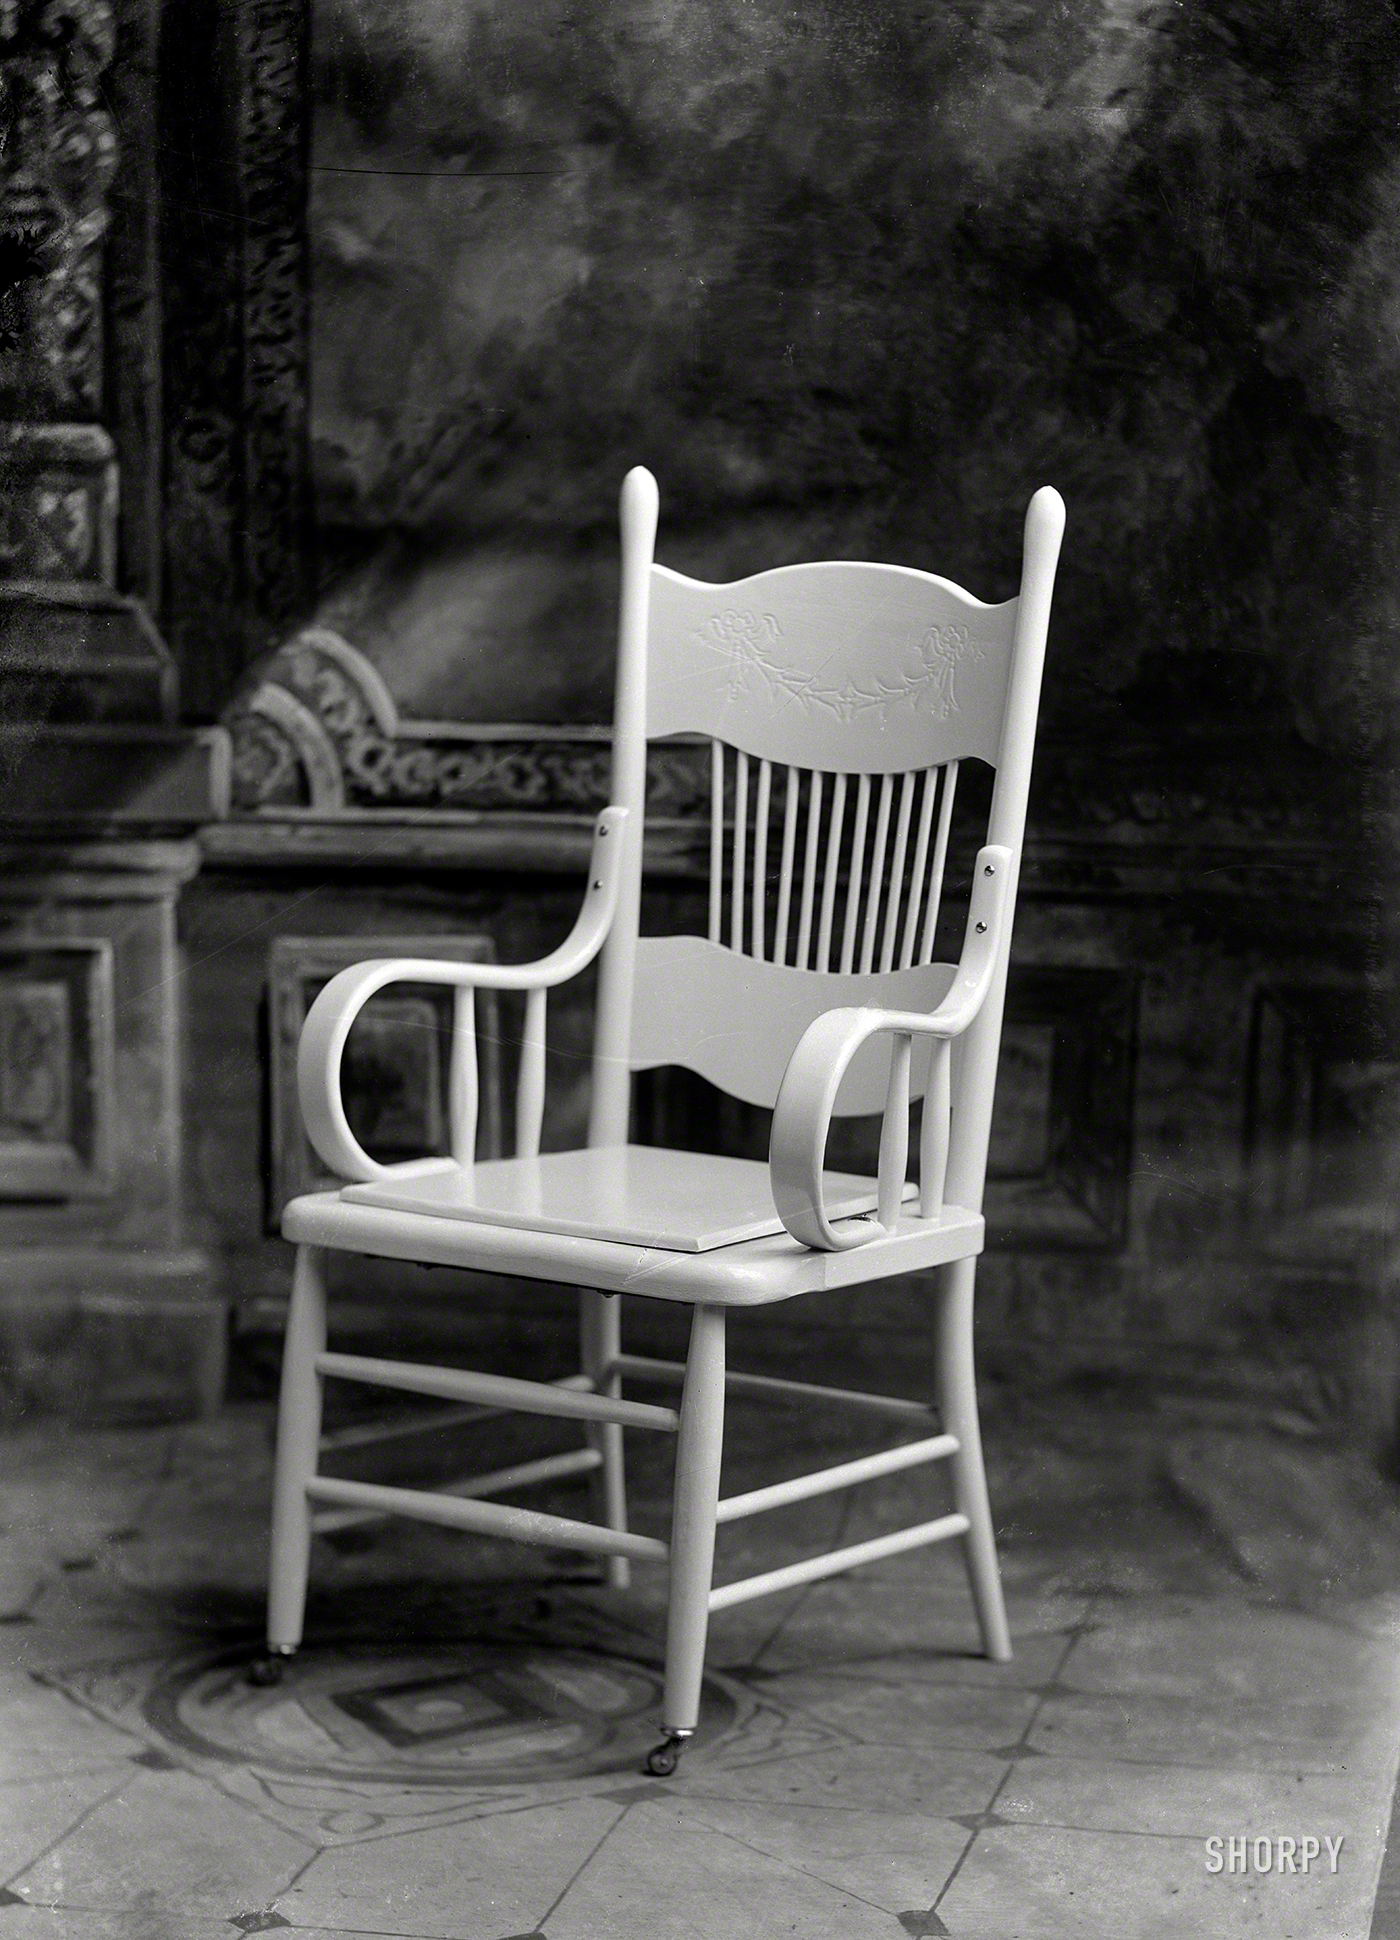 Circa 1898. "Dr. Beall 'old-fashioned chair'." 5x7 inch glass negative from the C.M. Bell portrait studio in Washington, D.C. View full size.